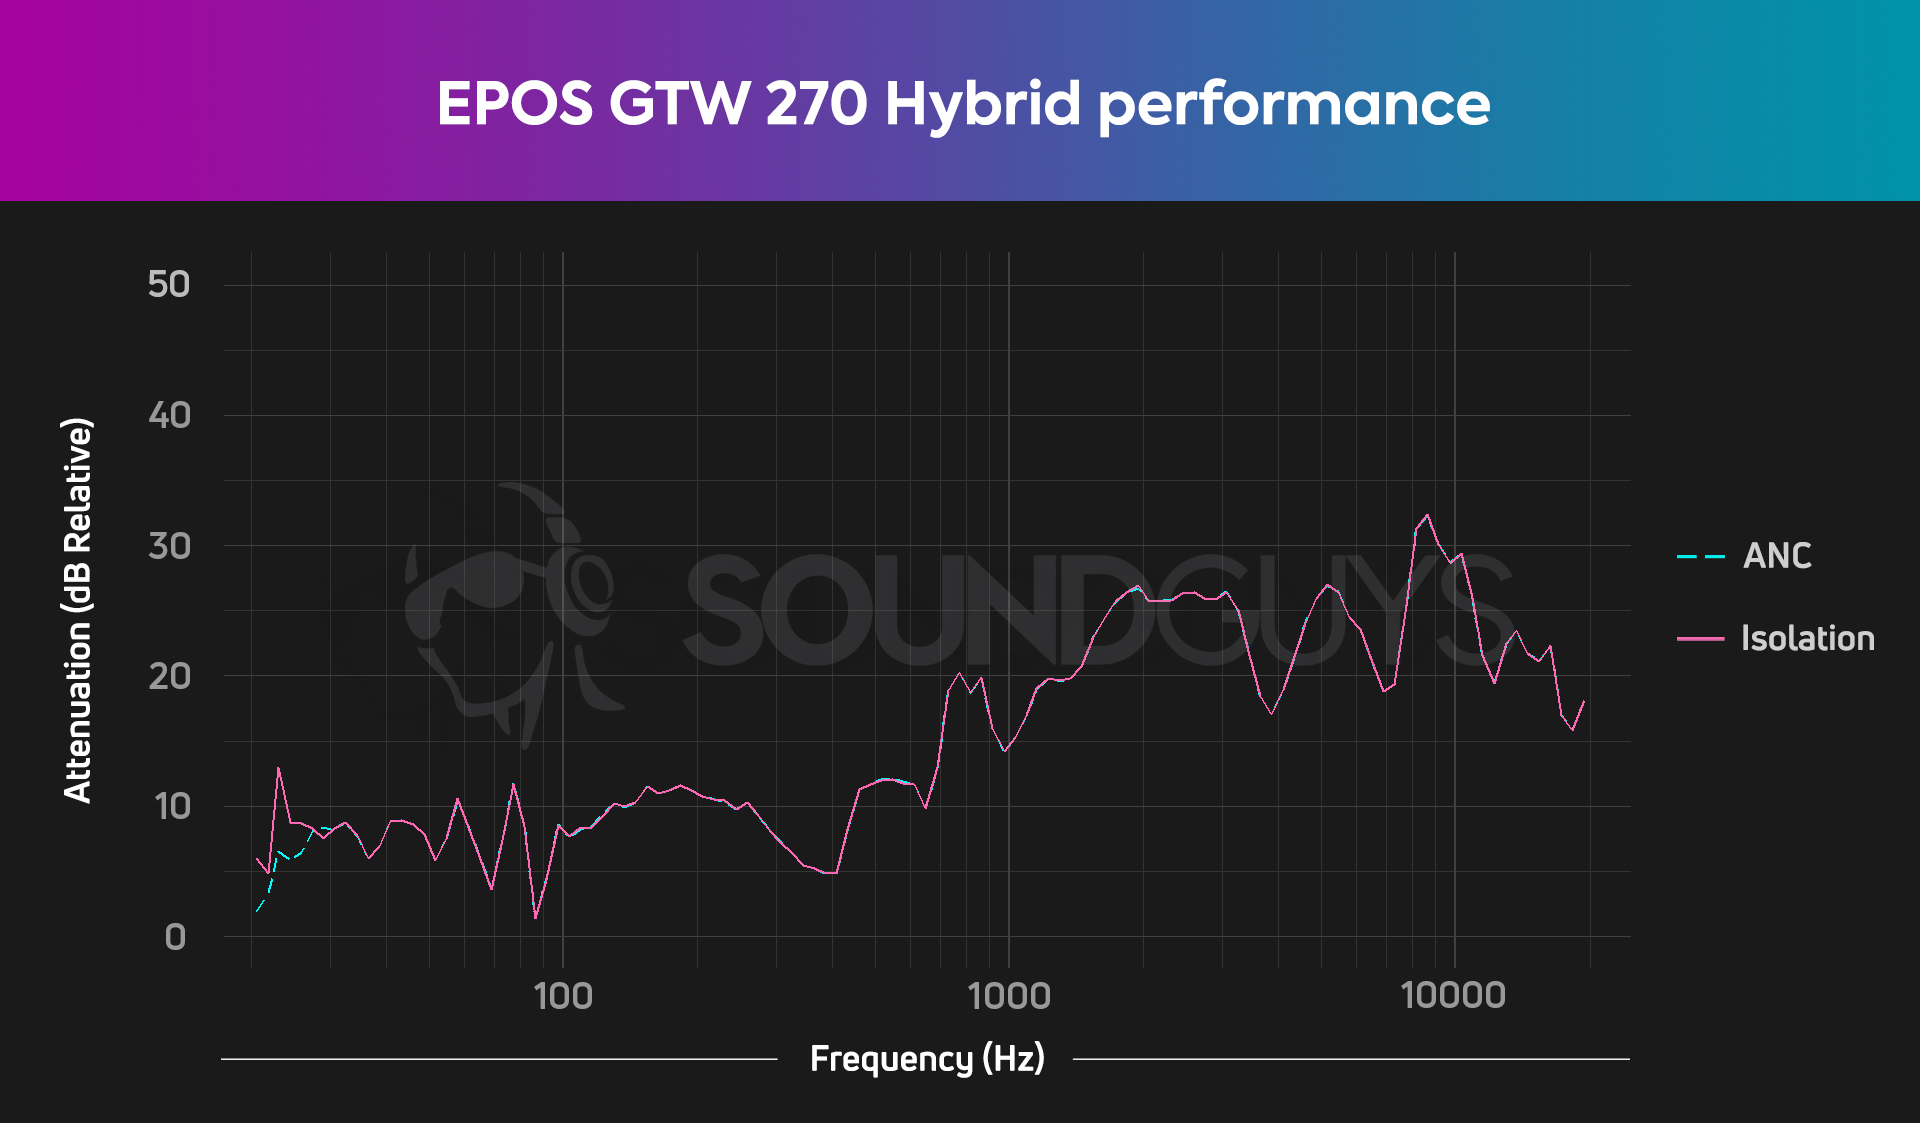 An isolation chart for the EPOS GTW 270 Hybrid gaming headset